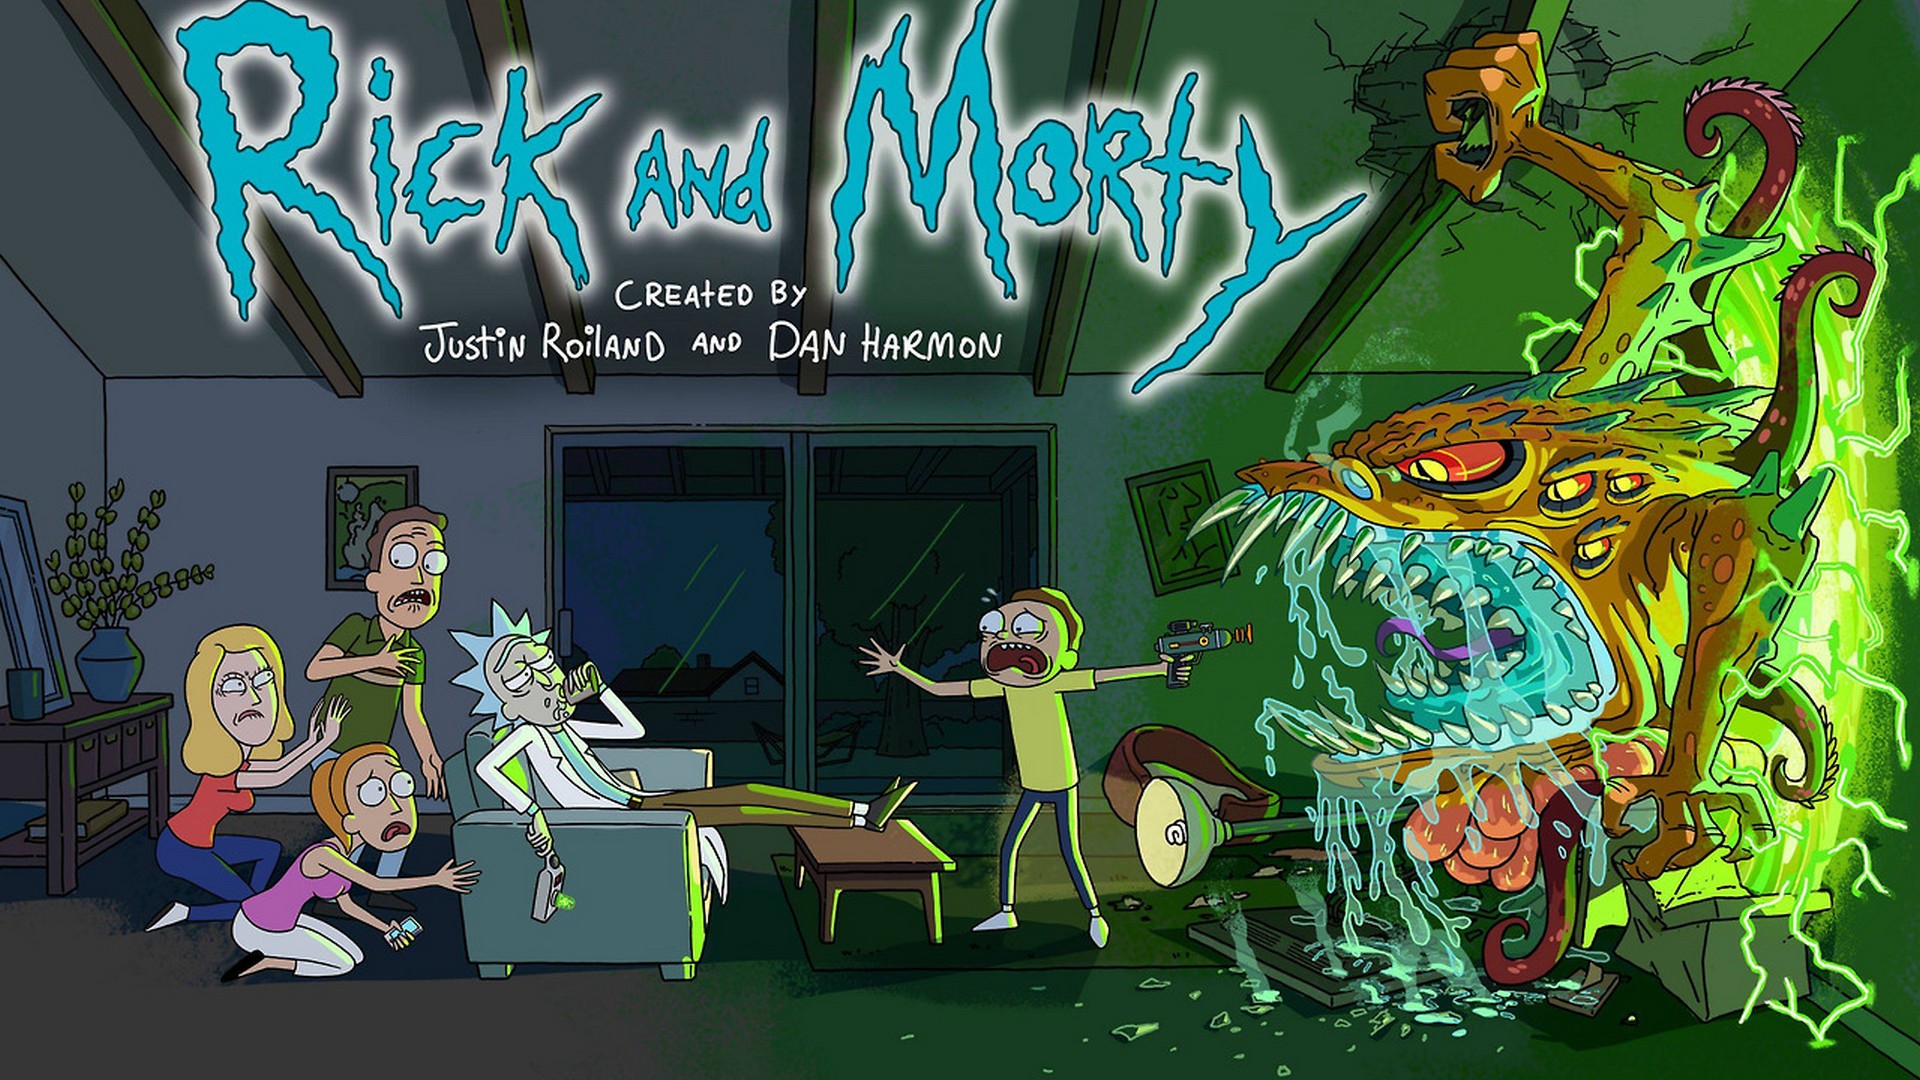 Rick and Morty Art Desktop Wallpaper with resolution 1920X1080 pixel. You can use this wallpaper as background for your desktop Computer Screensavers, Android or iPhone smartphones